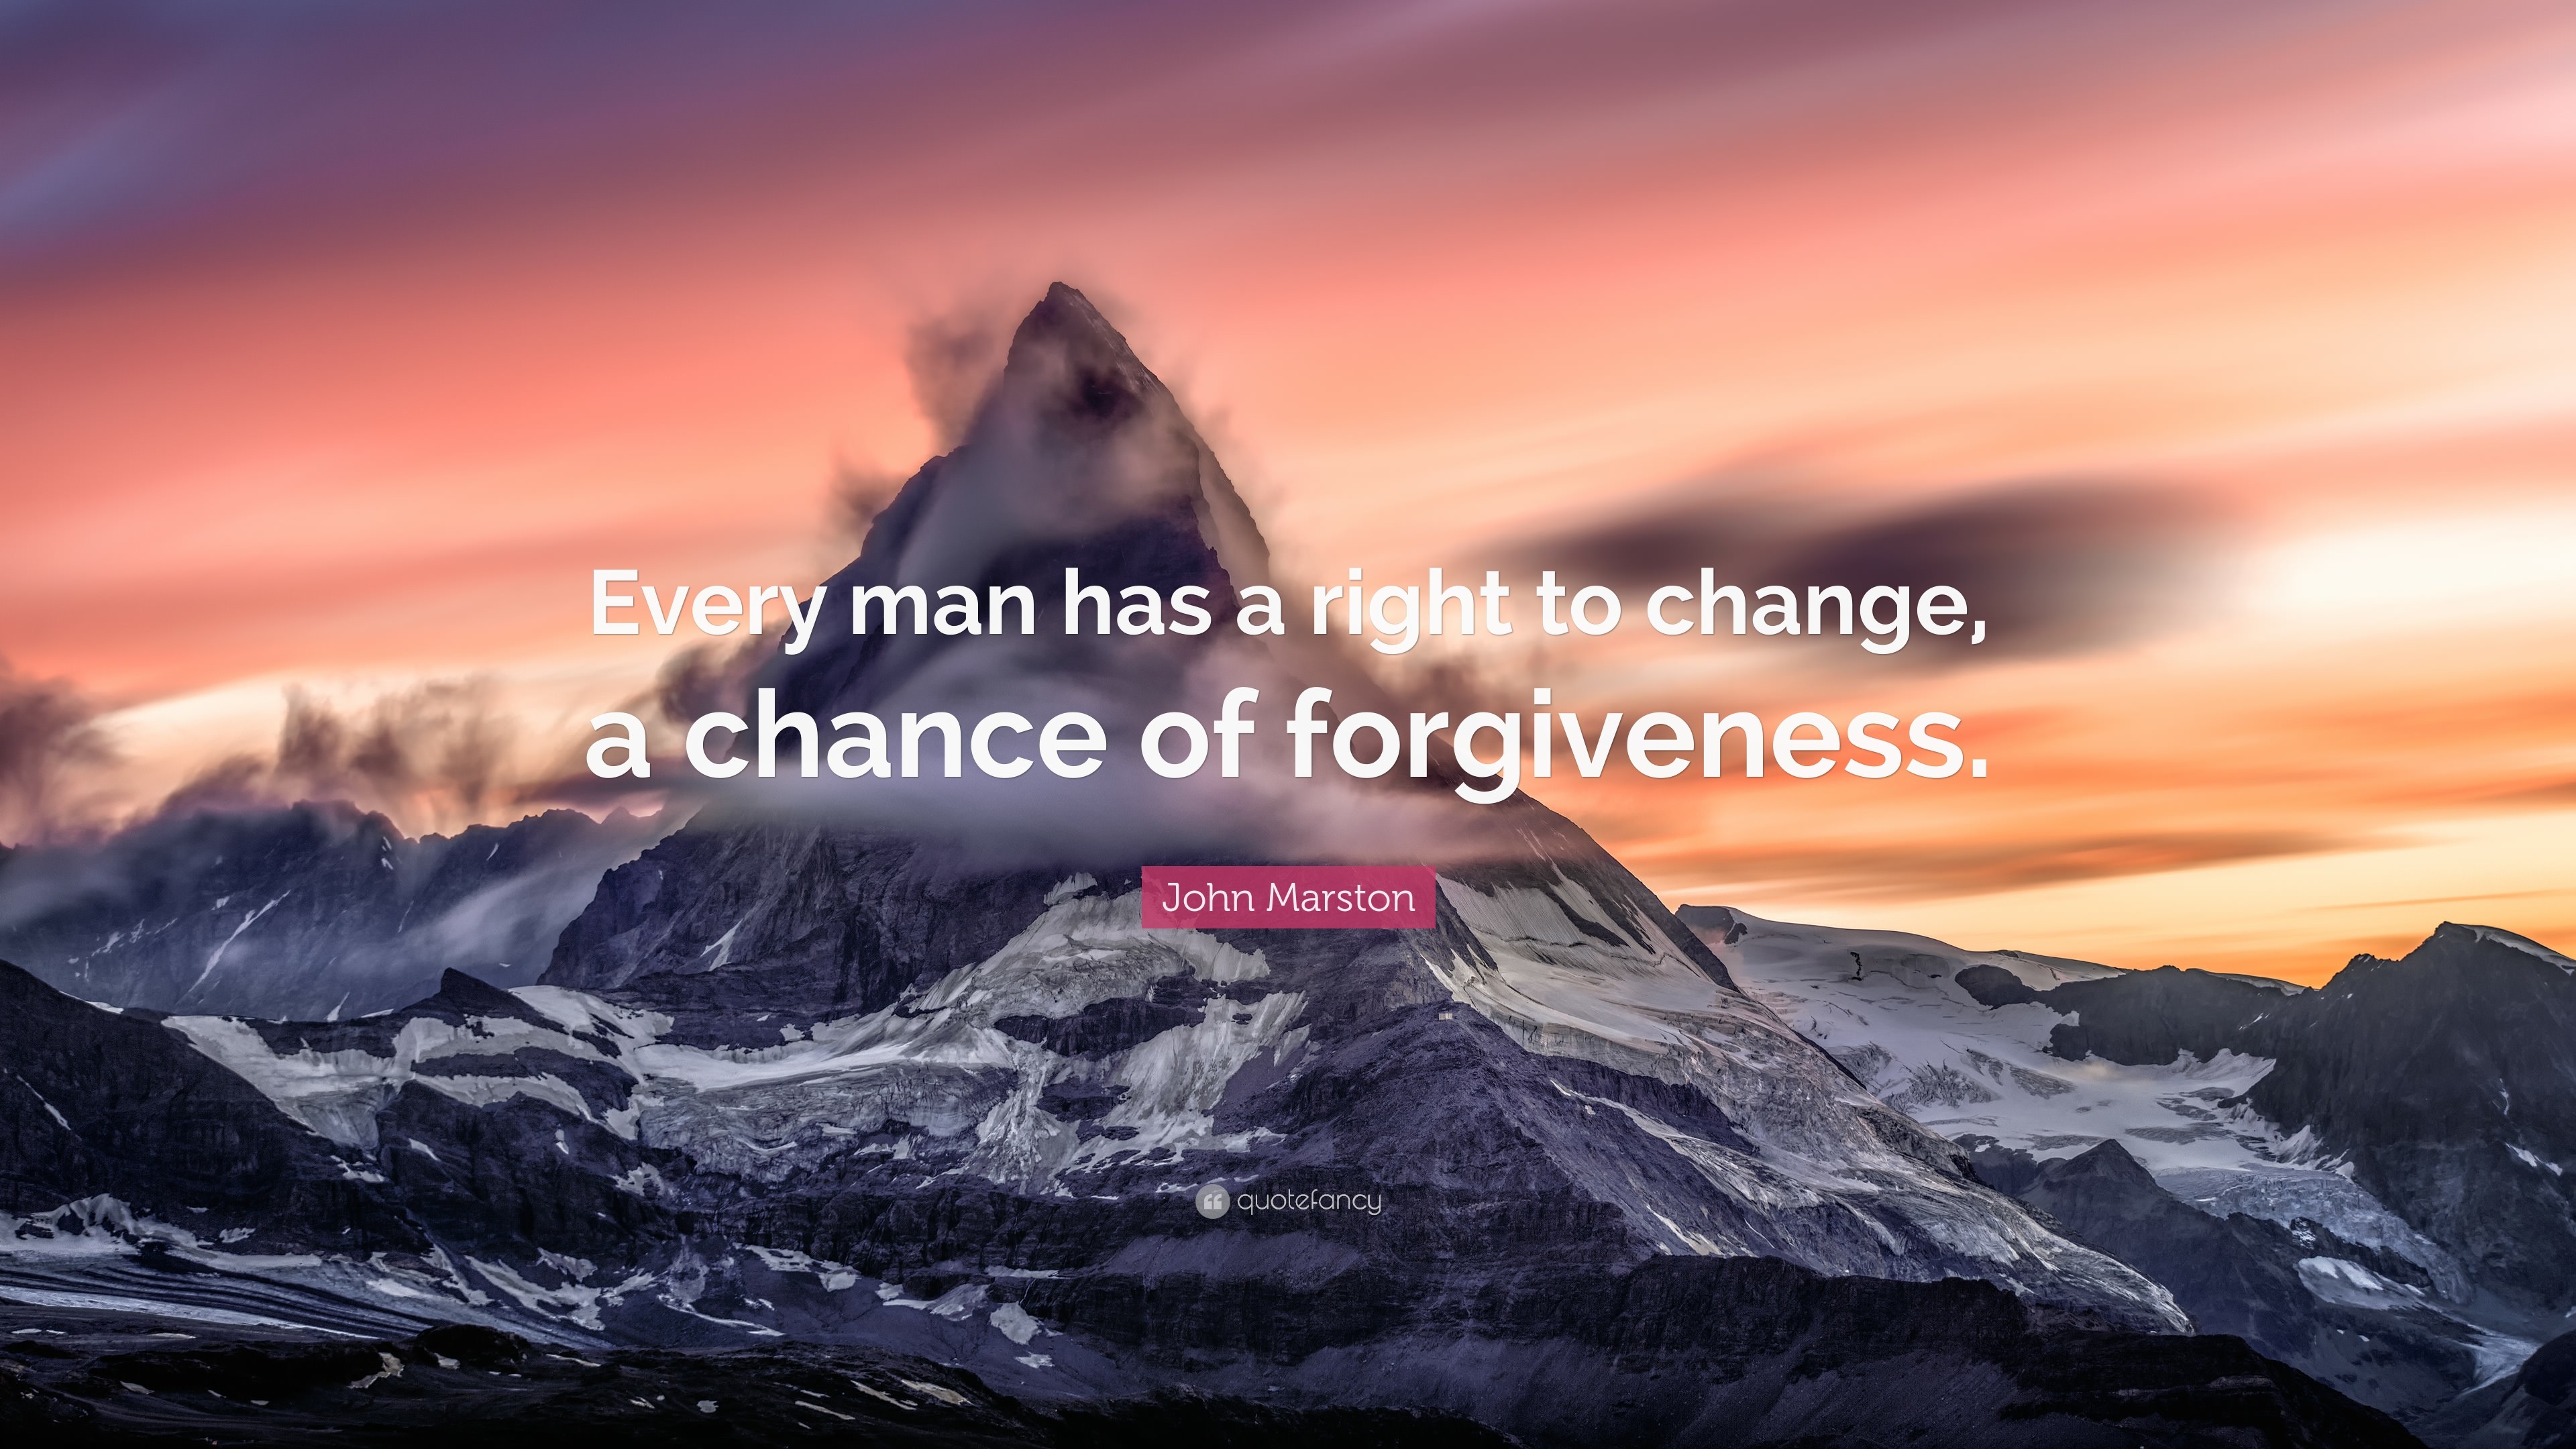 3840x2160 John Marston Quote: “Every man has a right to change, a chance of